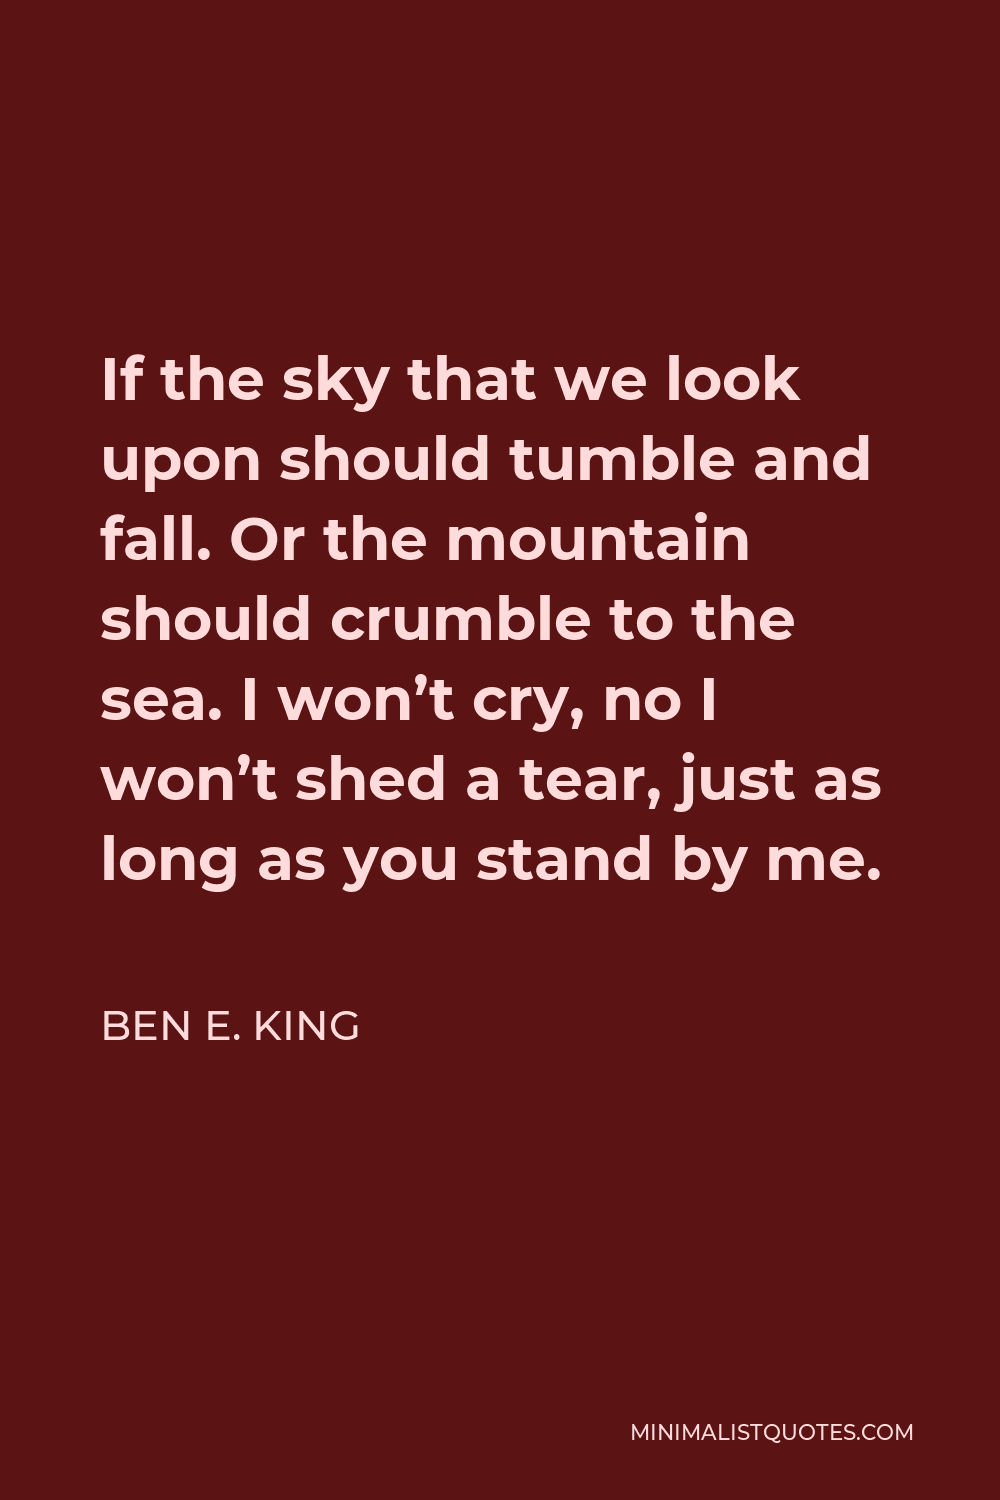 Ben E. King Quote - If the sky that we look upon should tumble and fall. Or the mountain should crumble to the sea. I won’t cry, no I won’t shed a tear, just as long as you stand by me.